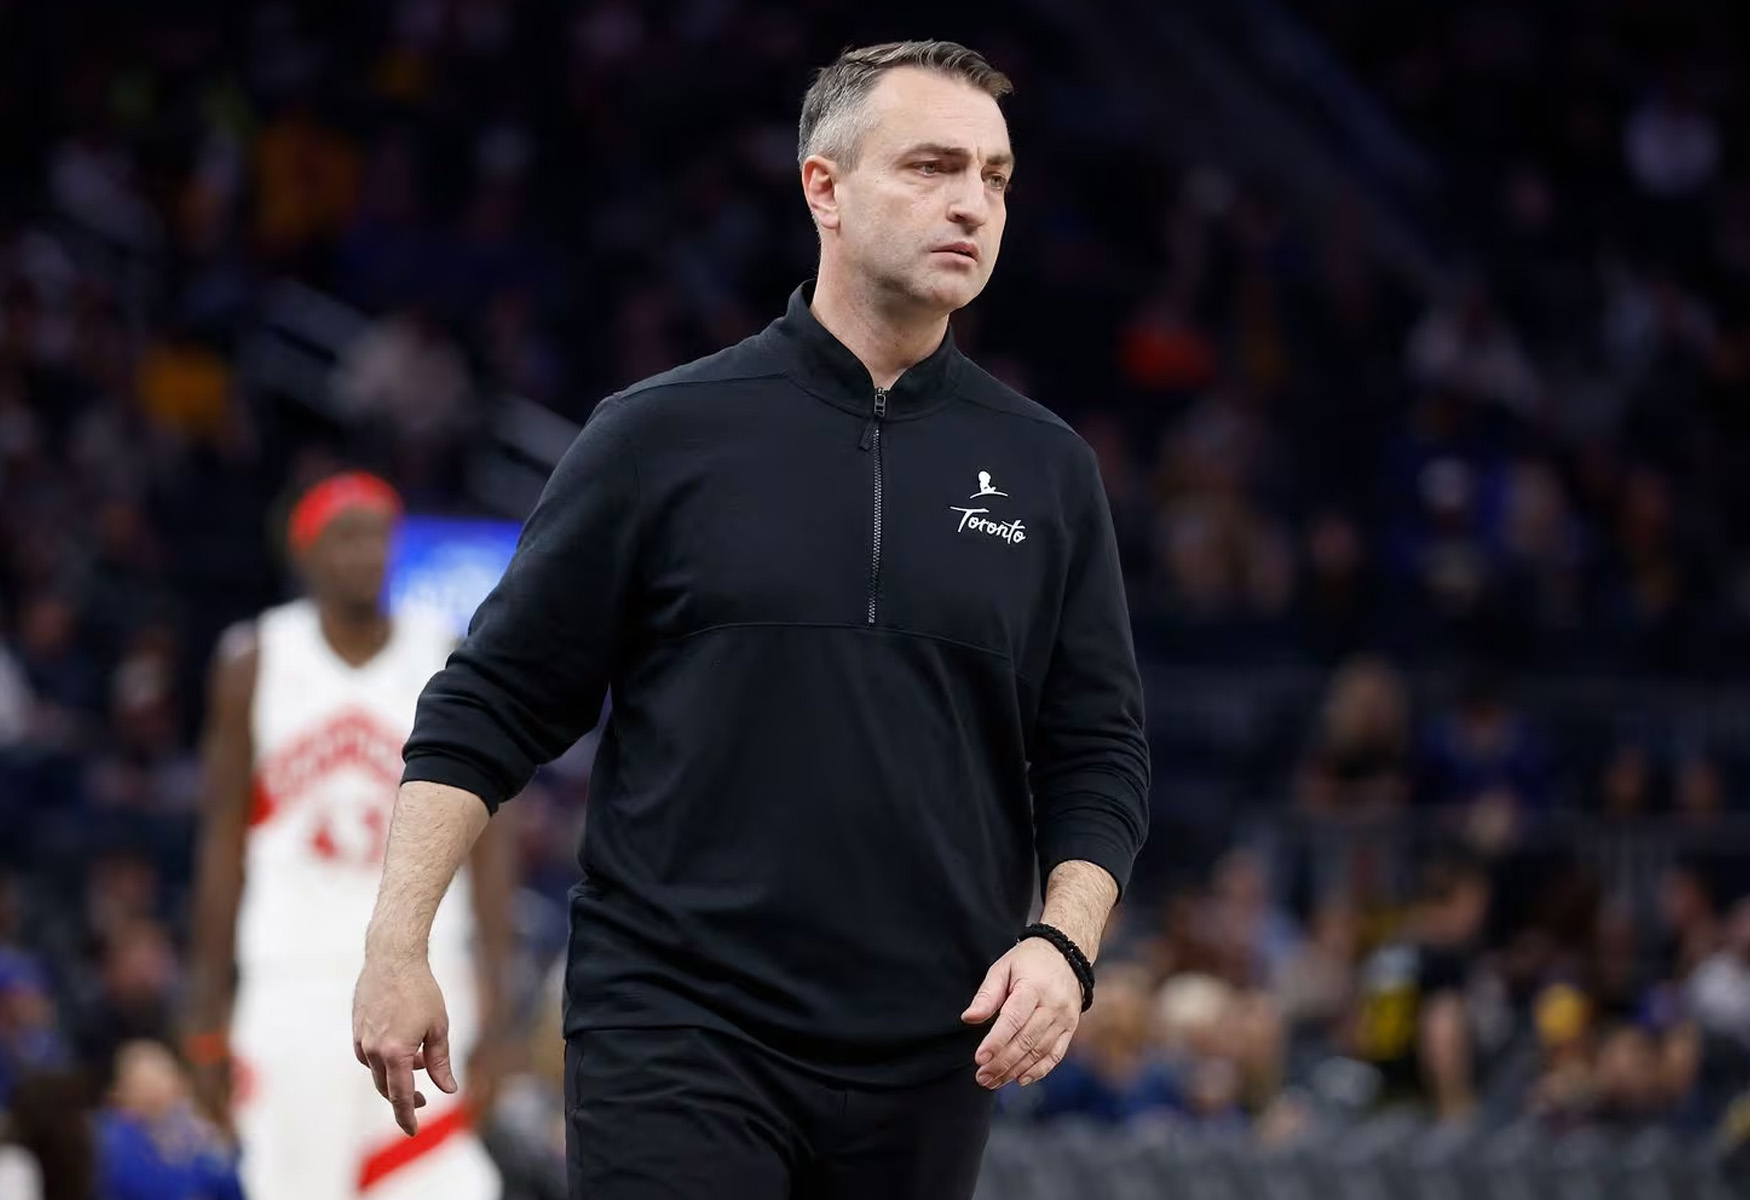 raptors-darko-rajakovic-calls-out-referees-for-biased-calls-in-fiery-postgame-rant